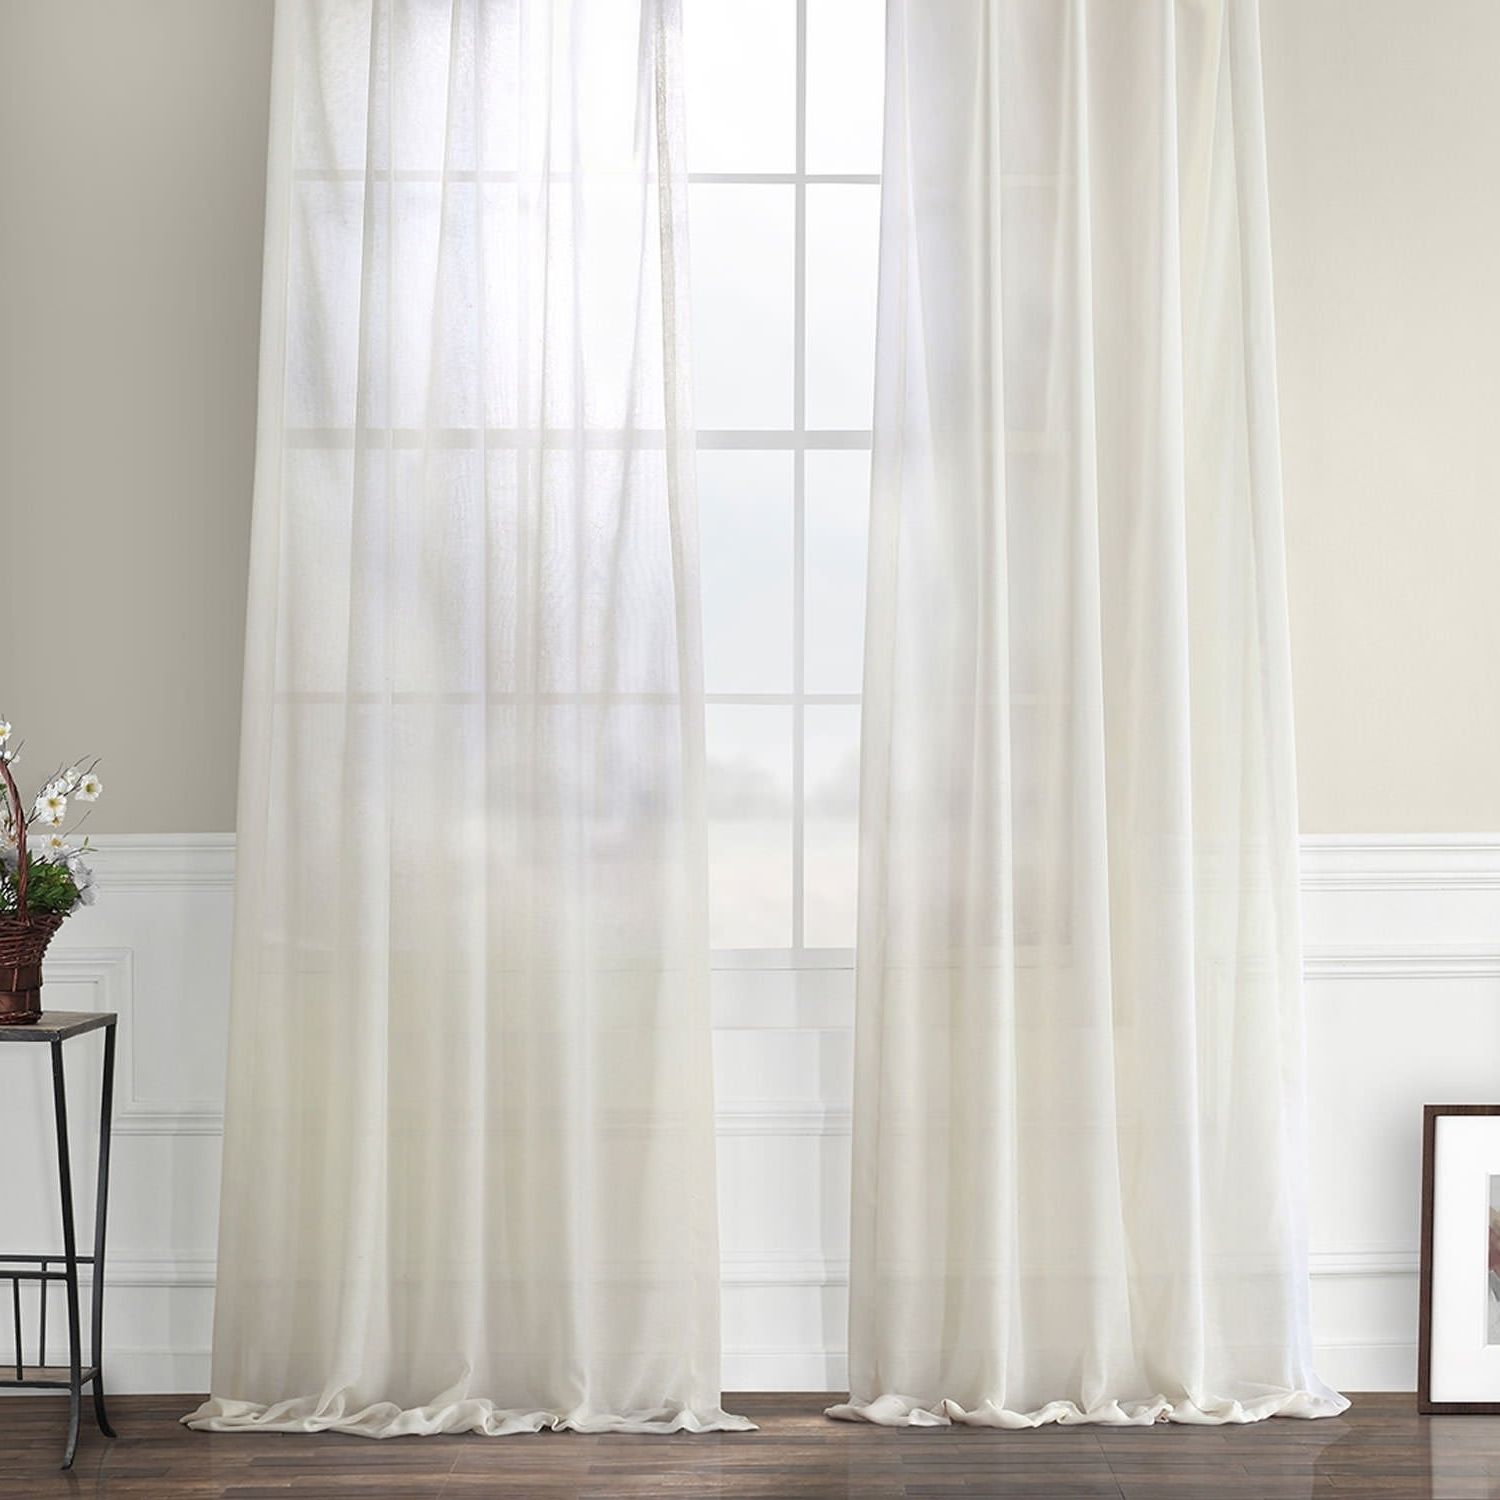 The 20 Best Collection of Laya Fretwork Burnout Sheer Curtain Panels